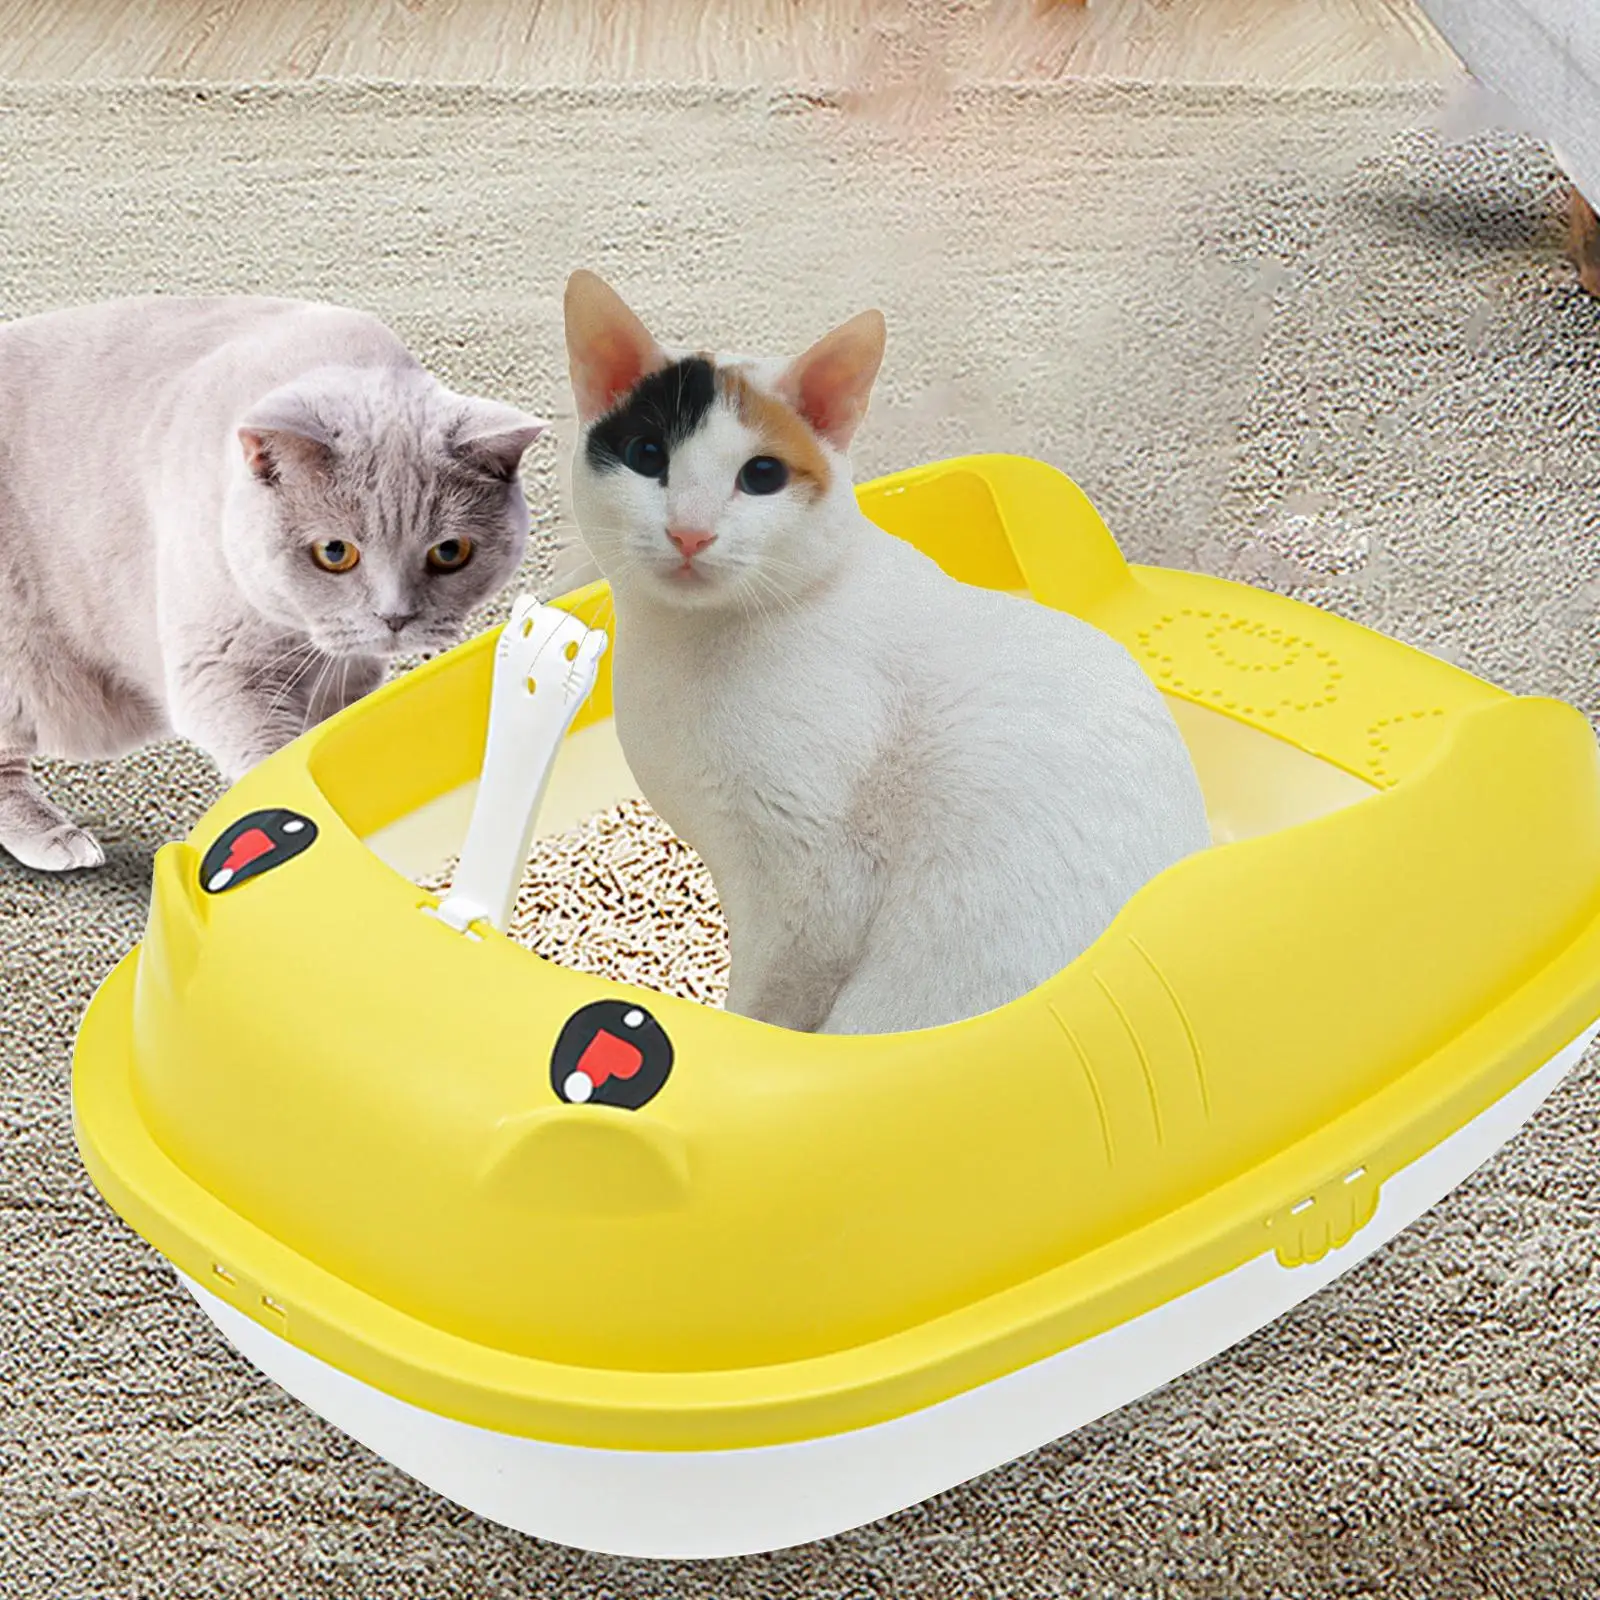 Cat Litter Box Bedpan High Sided Easy to Clean for Cats Supplies Kitty Bunny